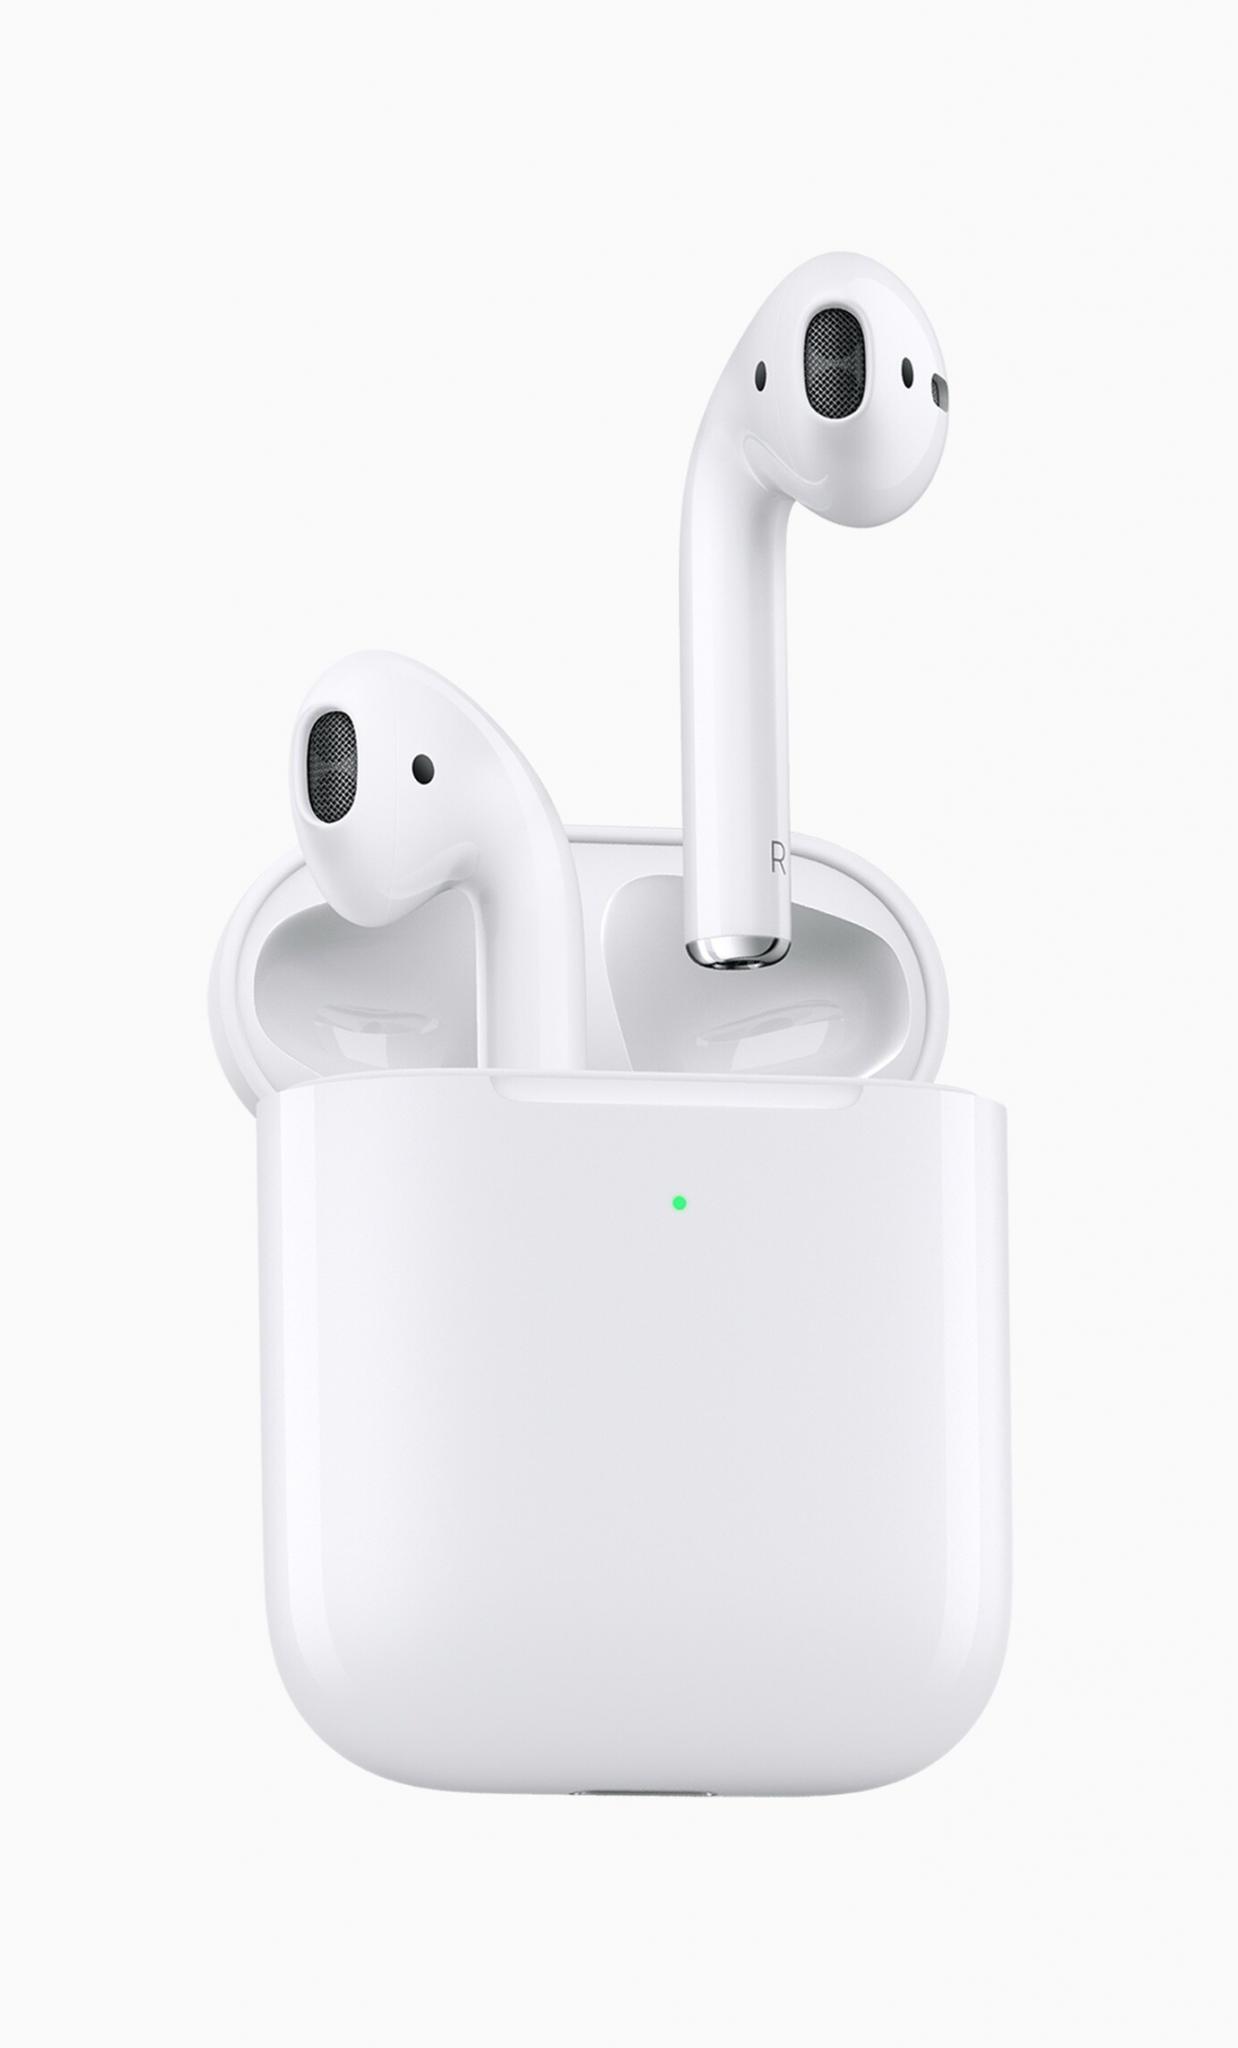 AirPods inside charging case.  